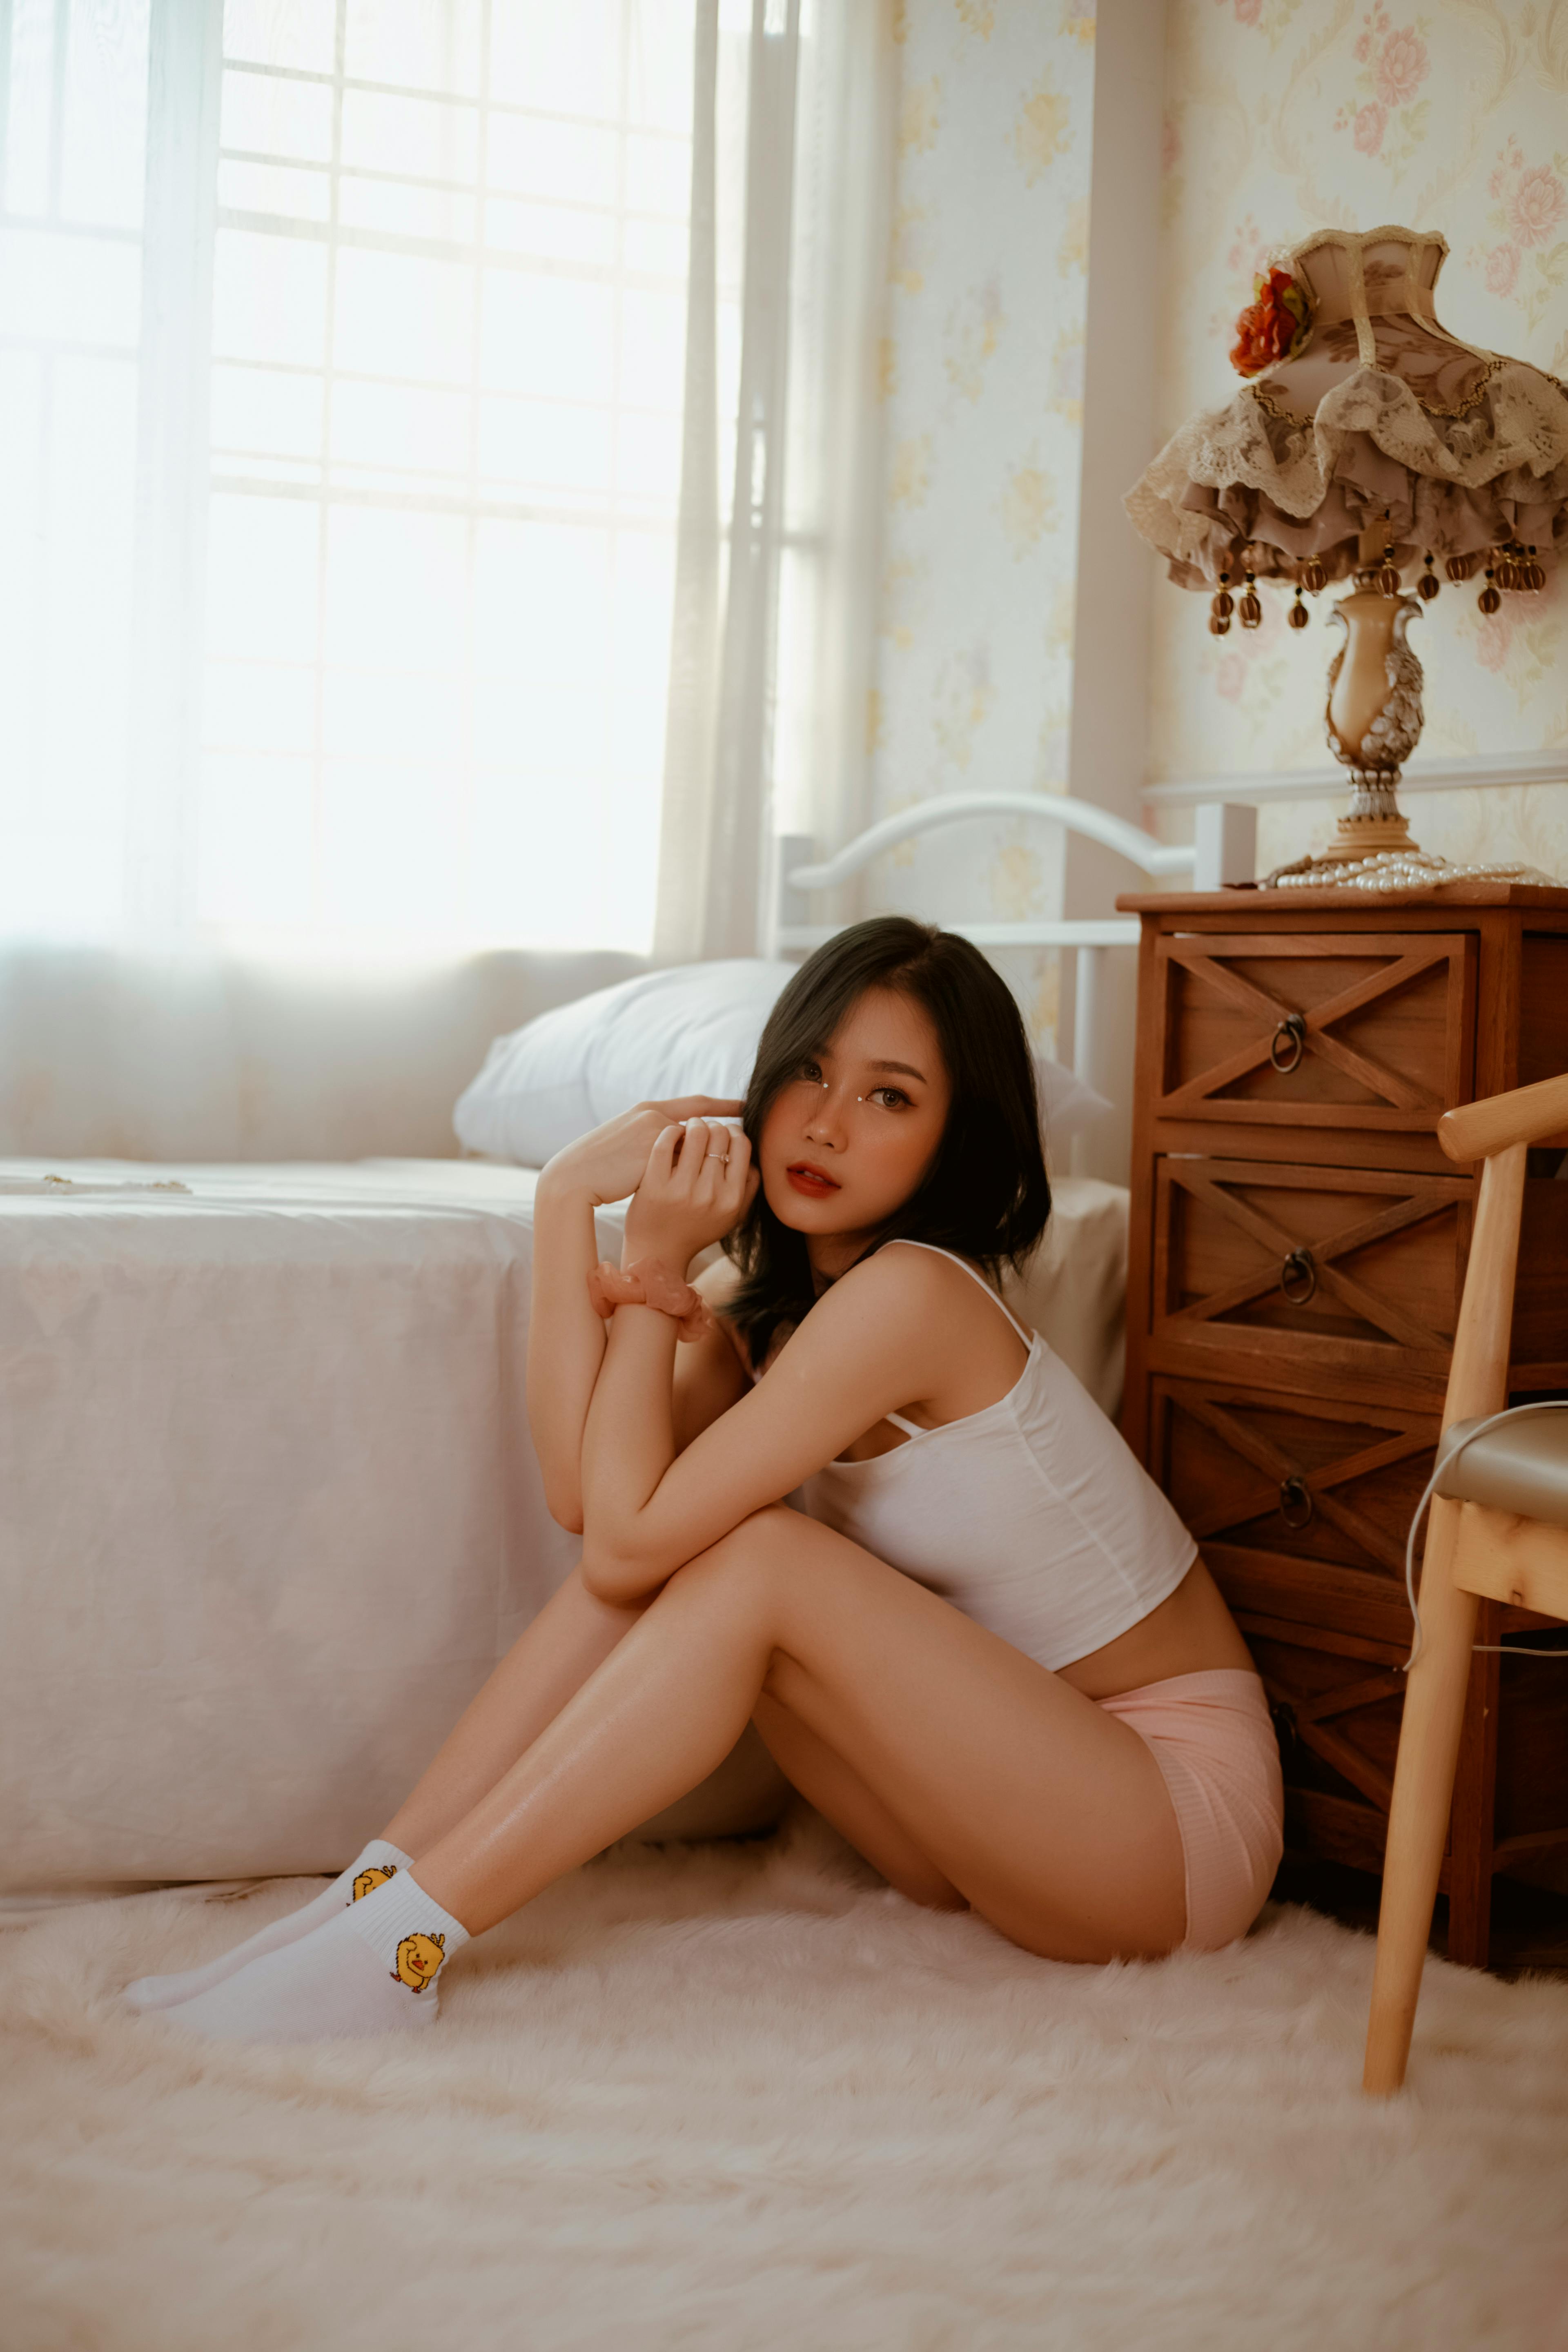 Young Woman in Underwear Sitting on the Floor of a Bedroom · Free Stock  Photo